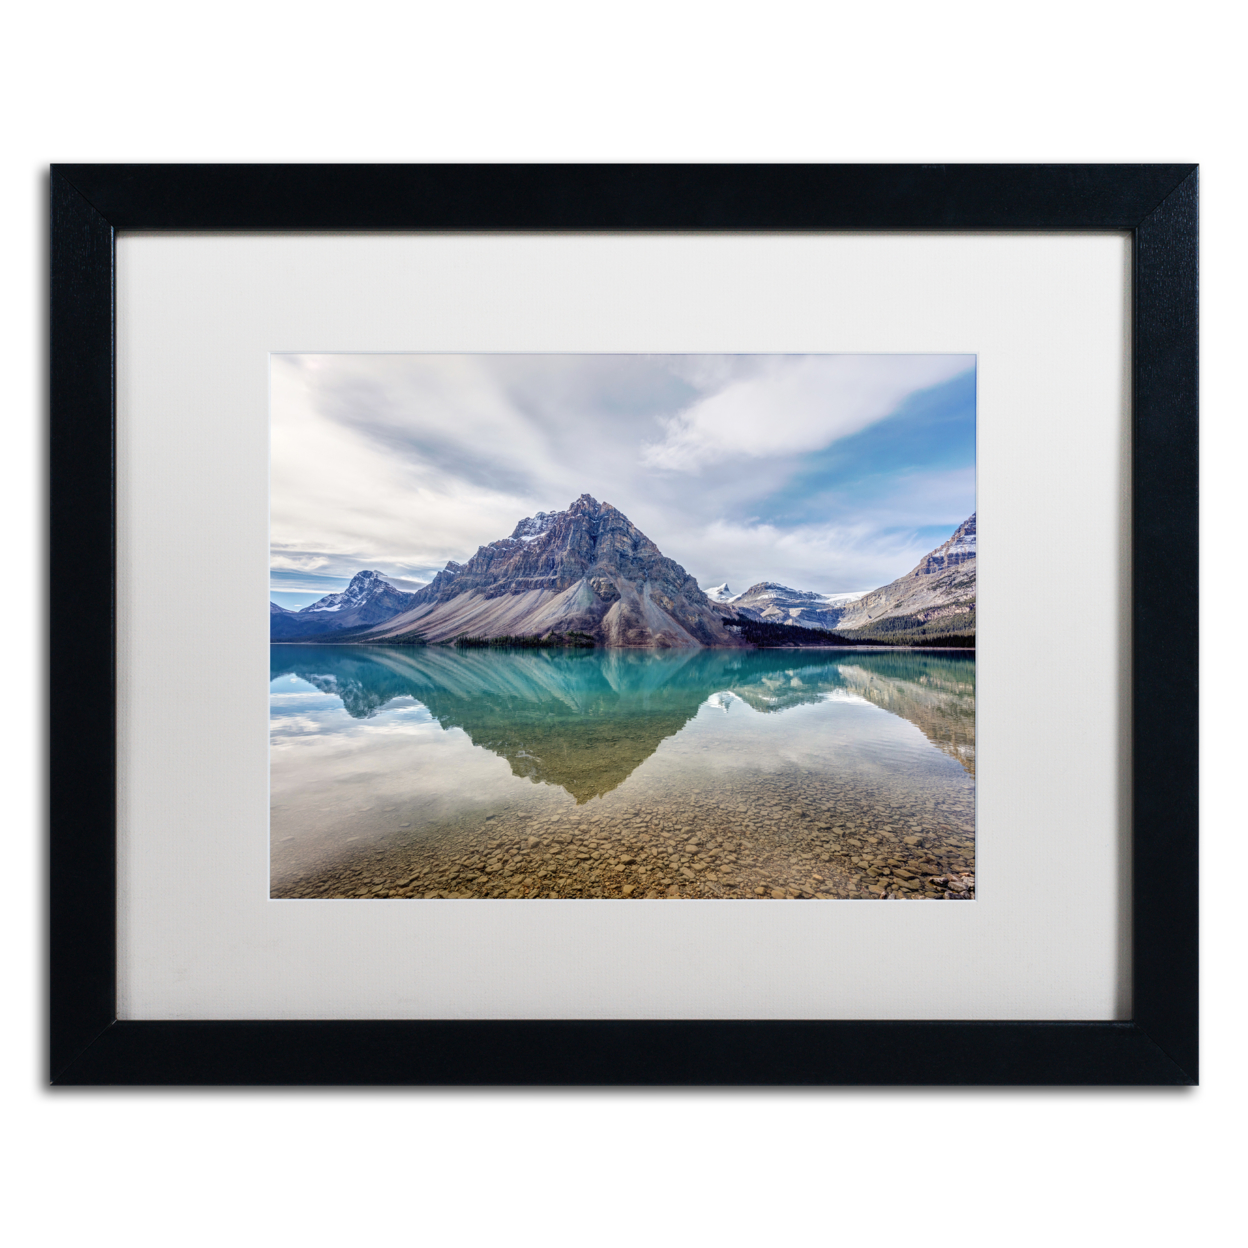 Pierre Leclerc 'Bow Lake Blue' Black Wooden Framed Art 18 X 22 Inches